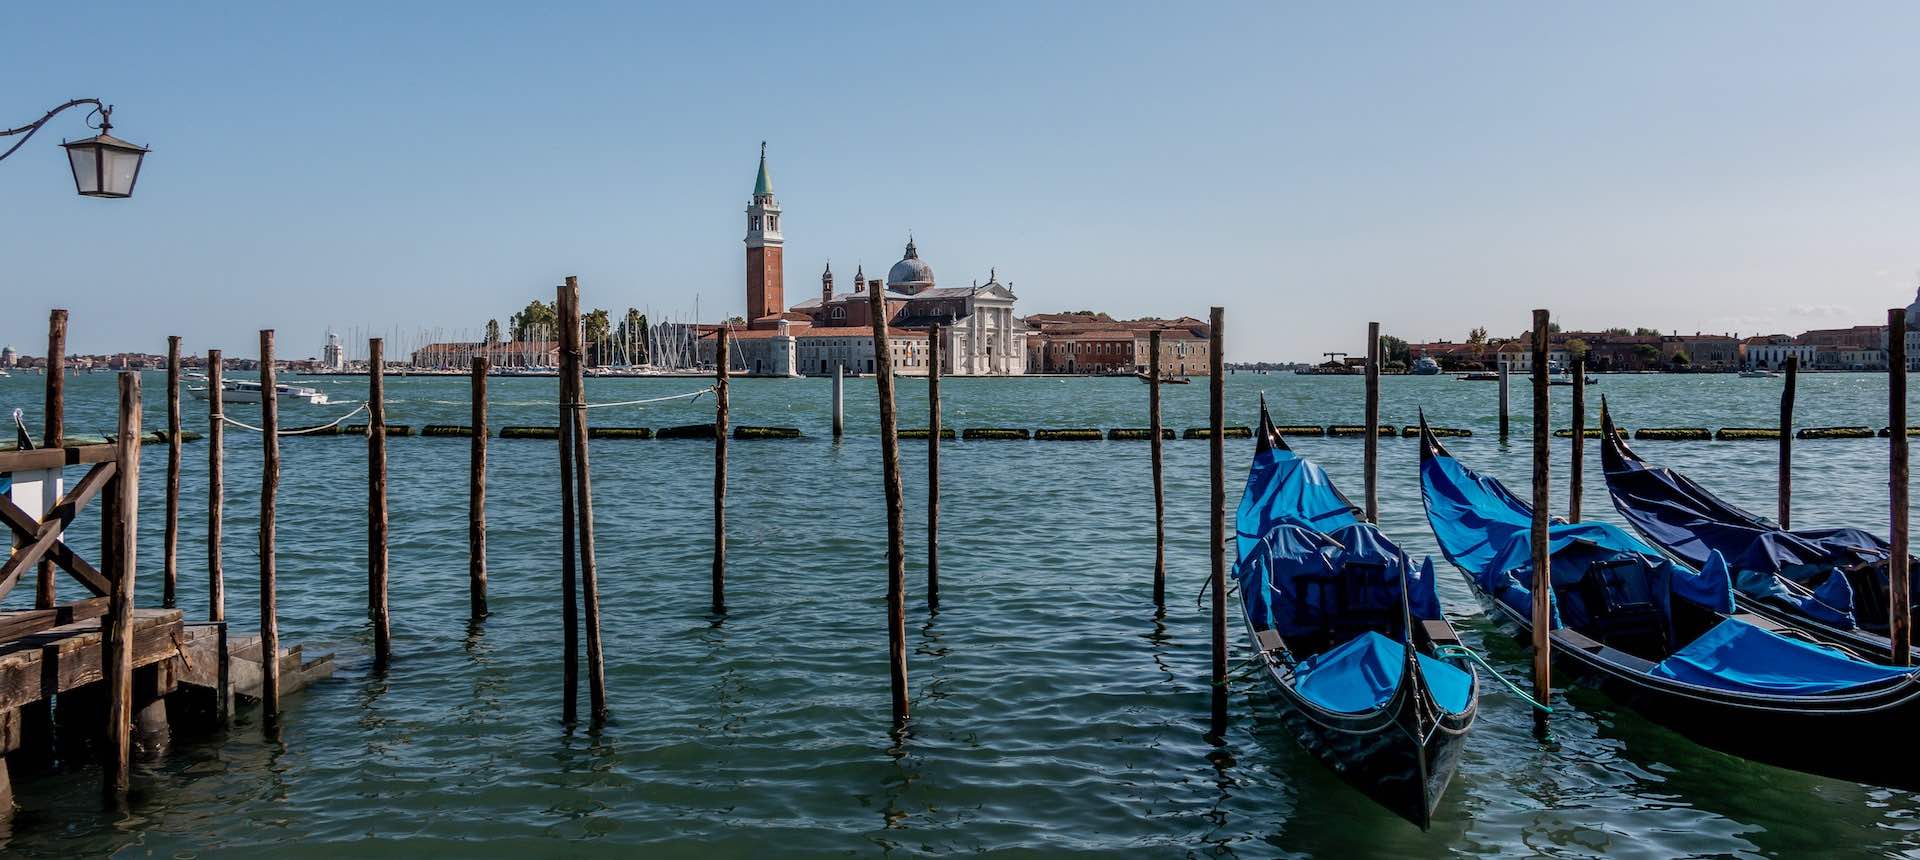 Two gondolas are moored up by a pier in Venice, water stretches out towards old historical buildings in the distance.